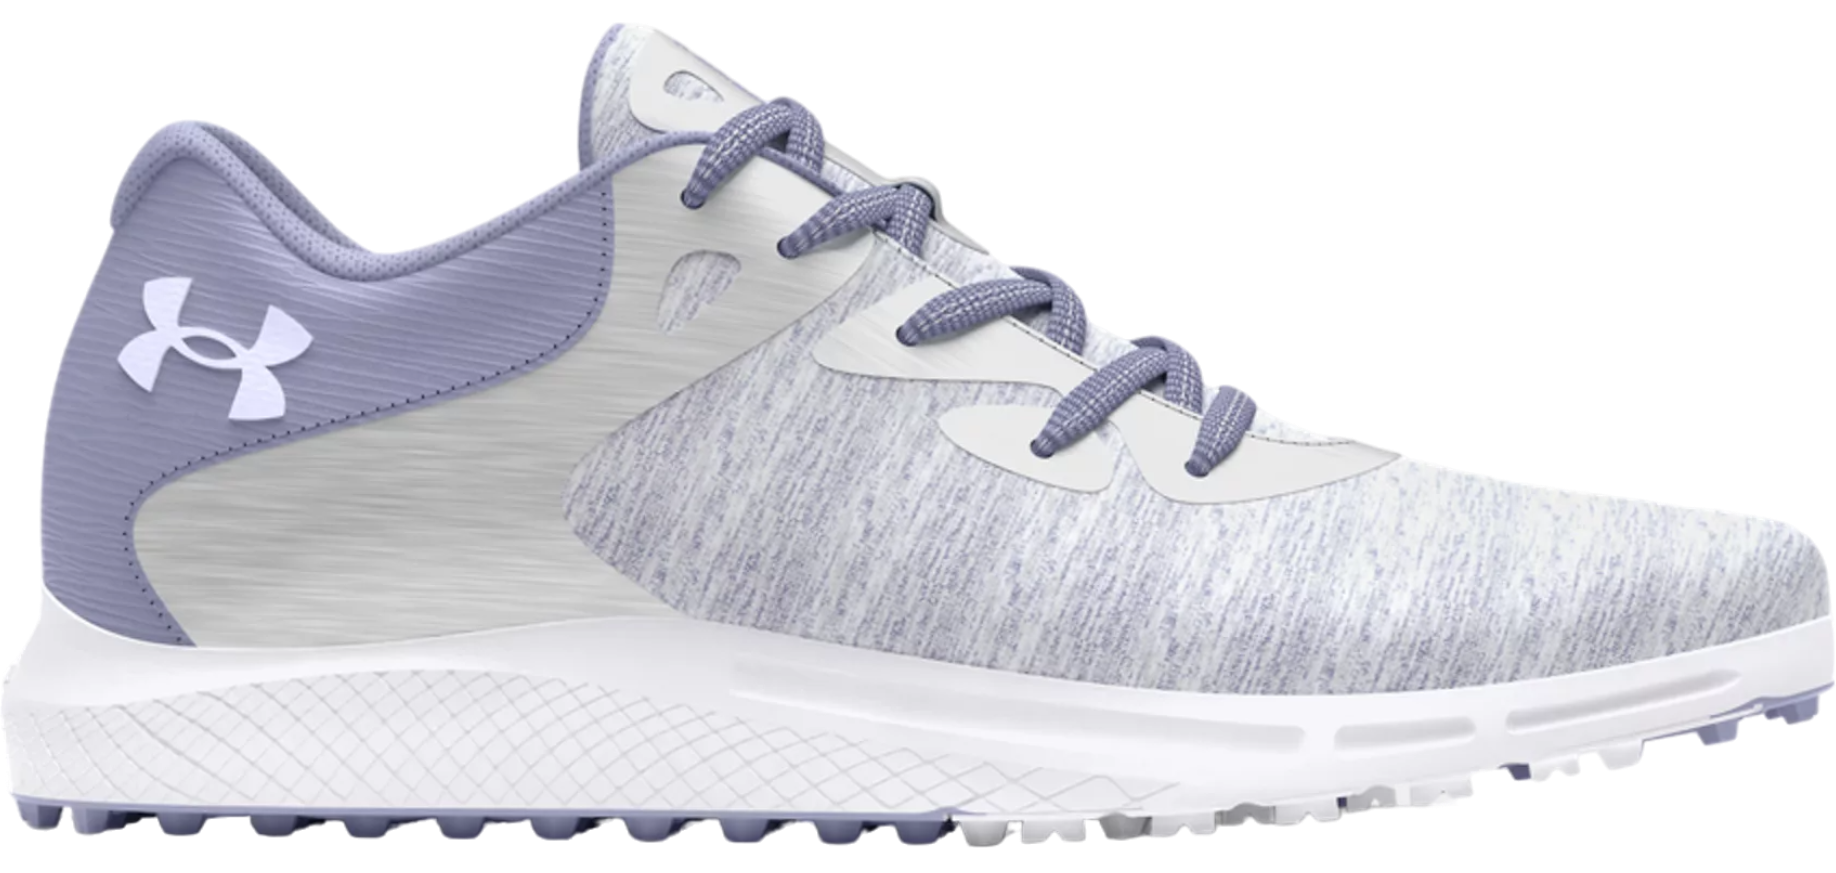 Skor Under Armour Charged Breathe 2 Knit SL